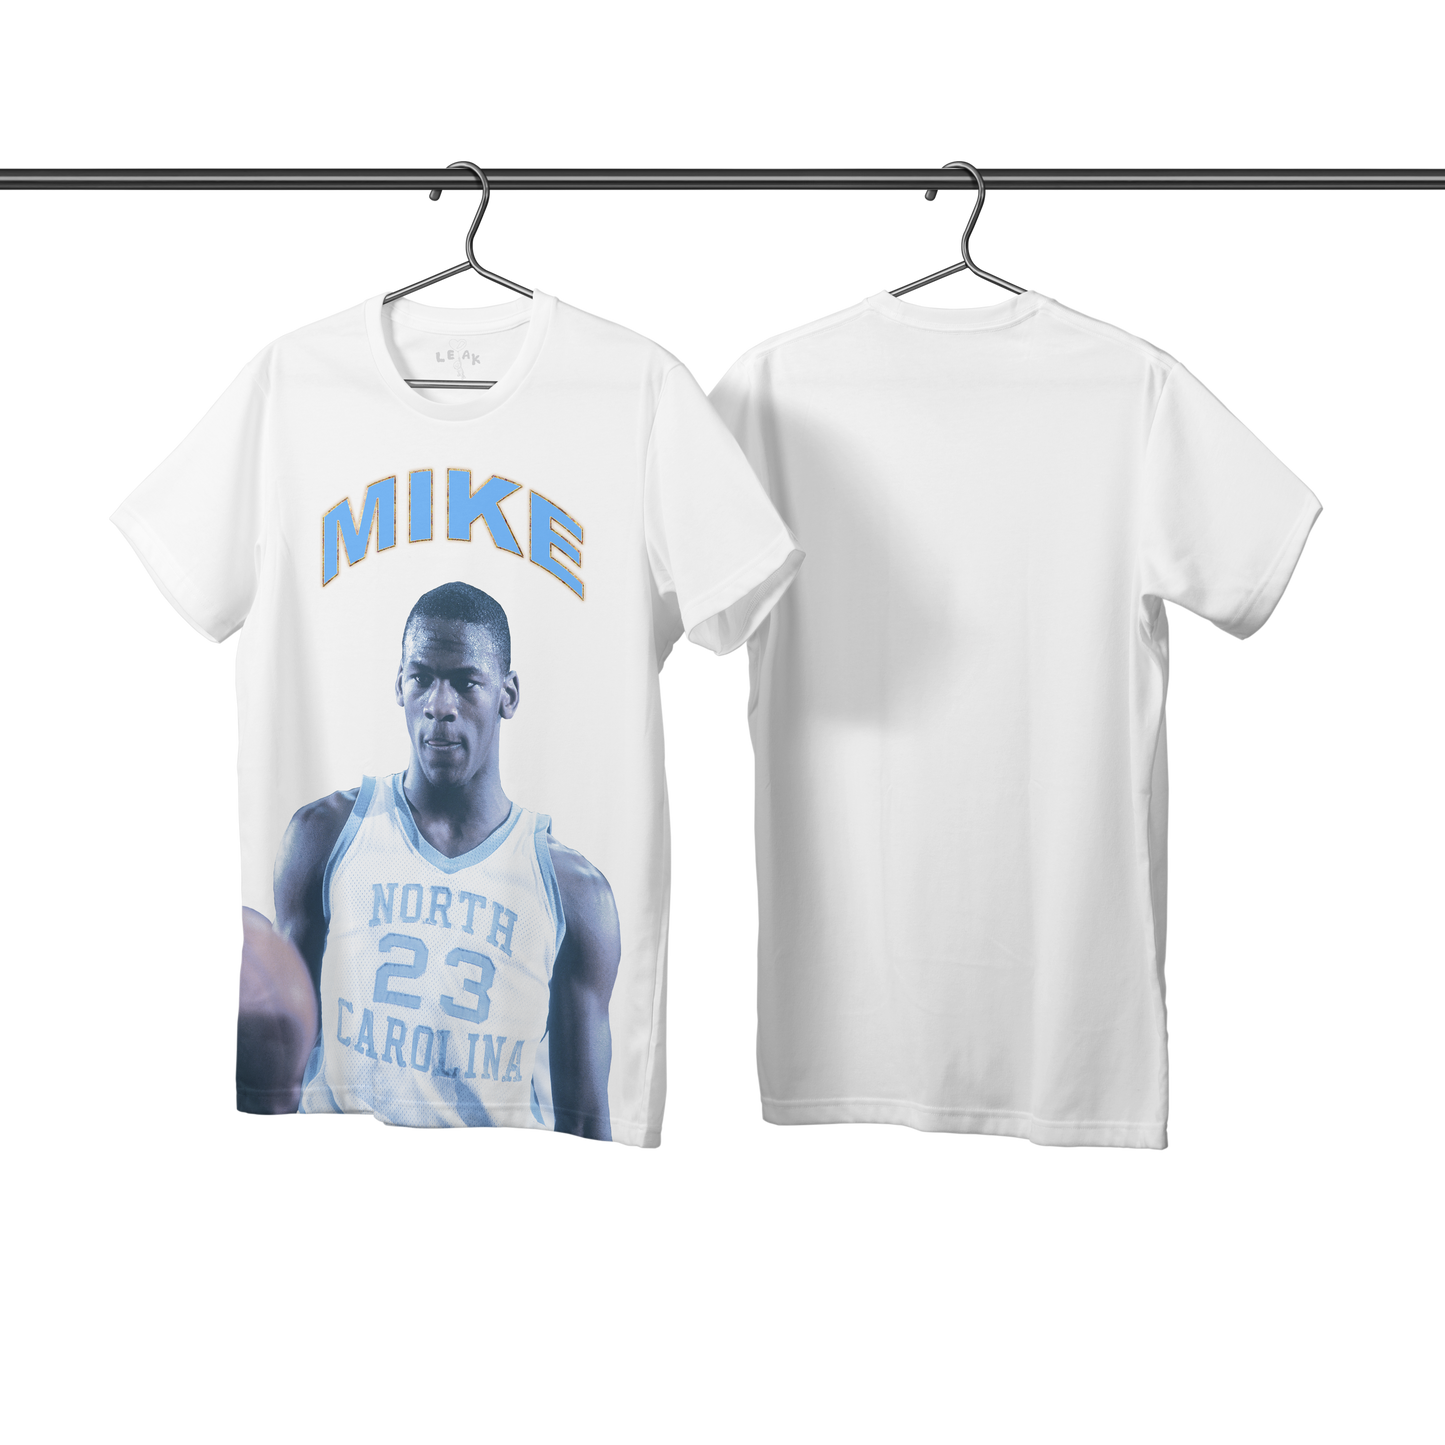 LEAK "MIKE" YOUNG GOAT T-SHIRT